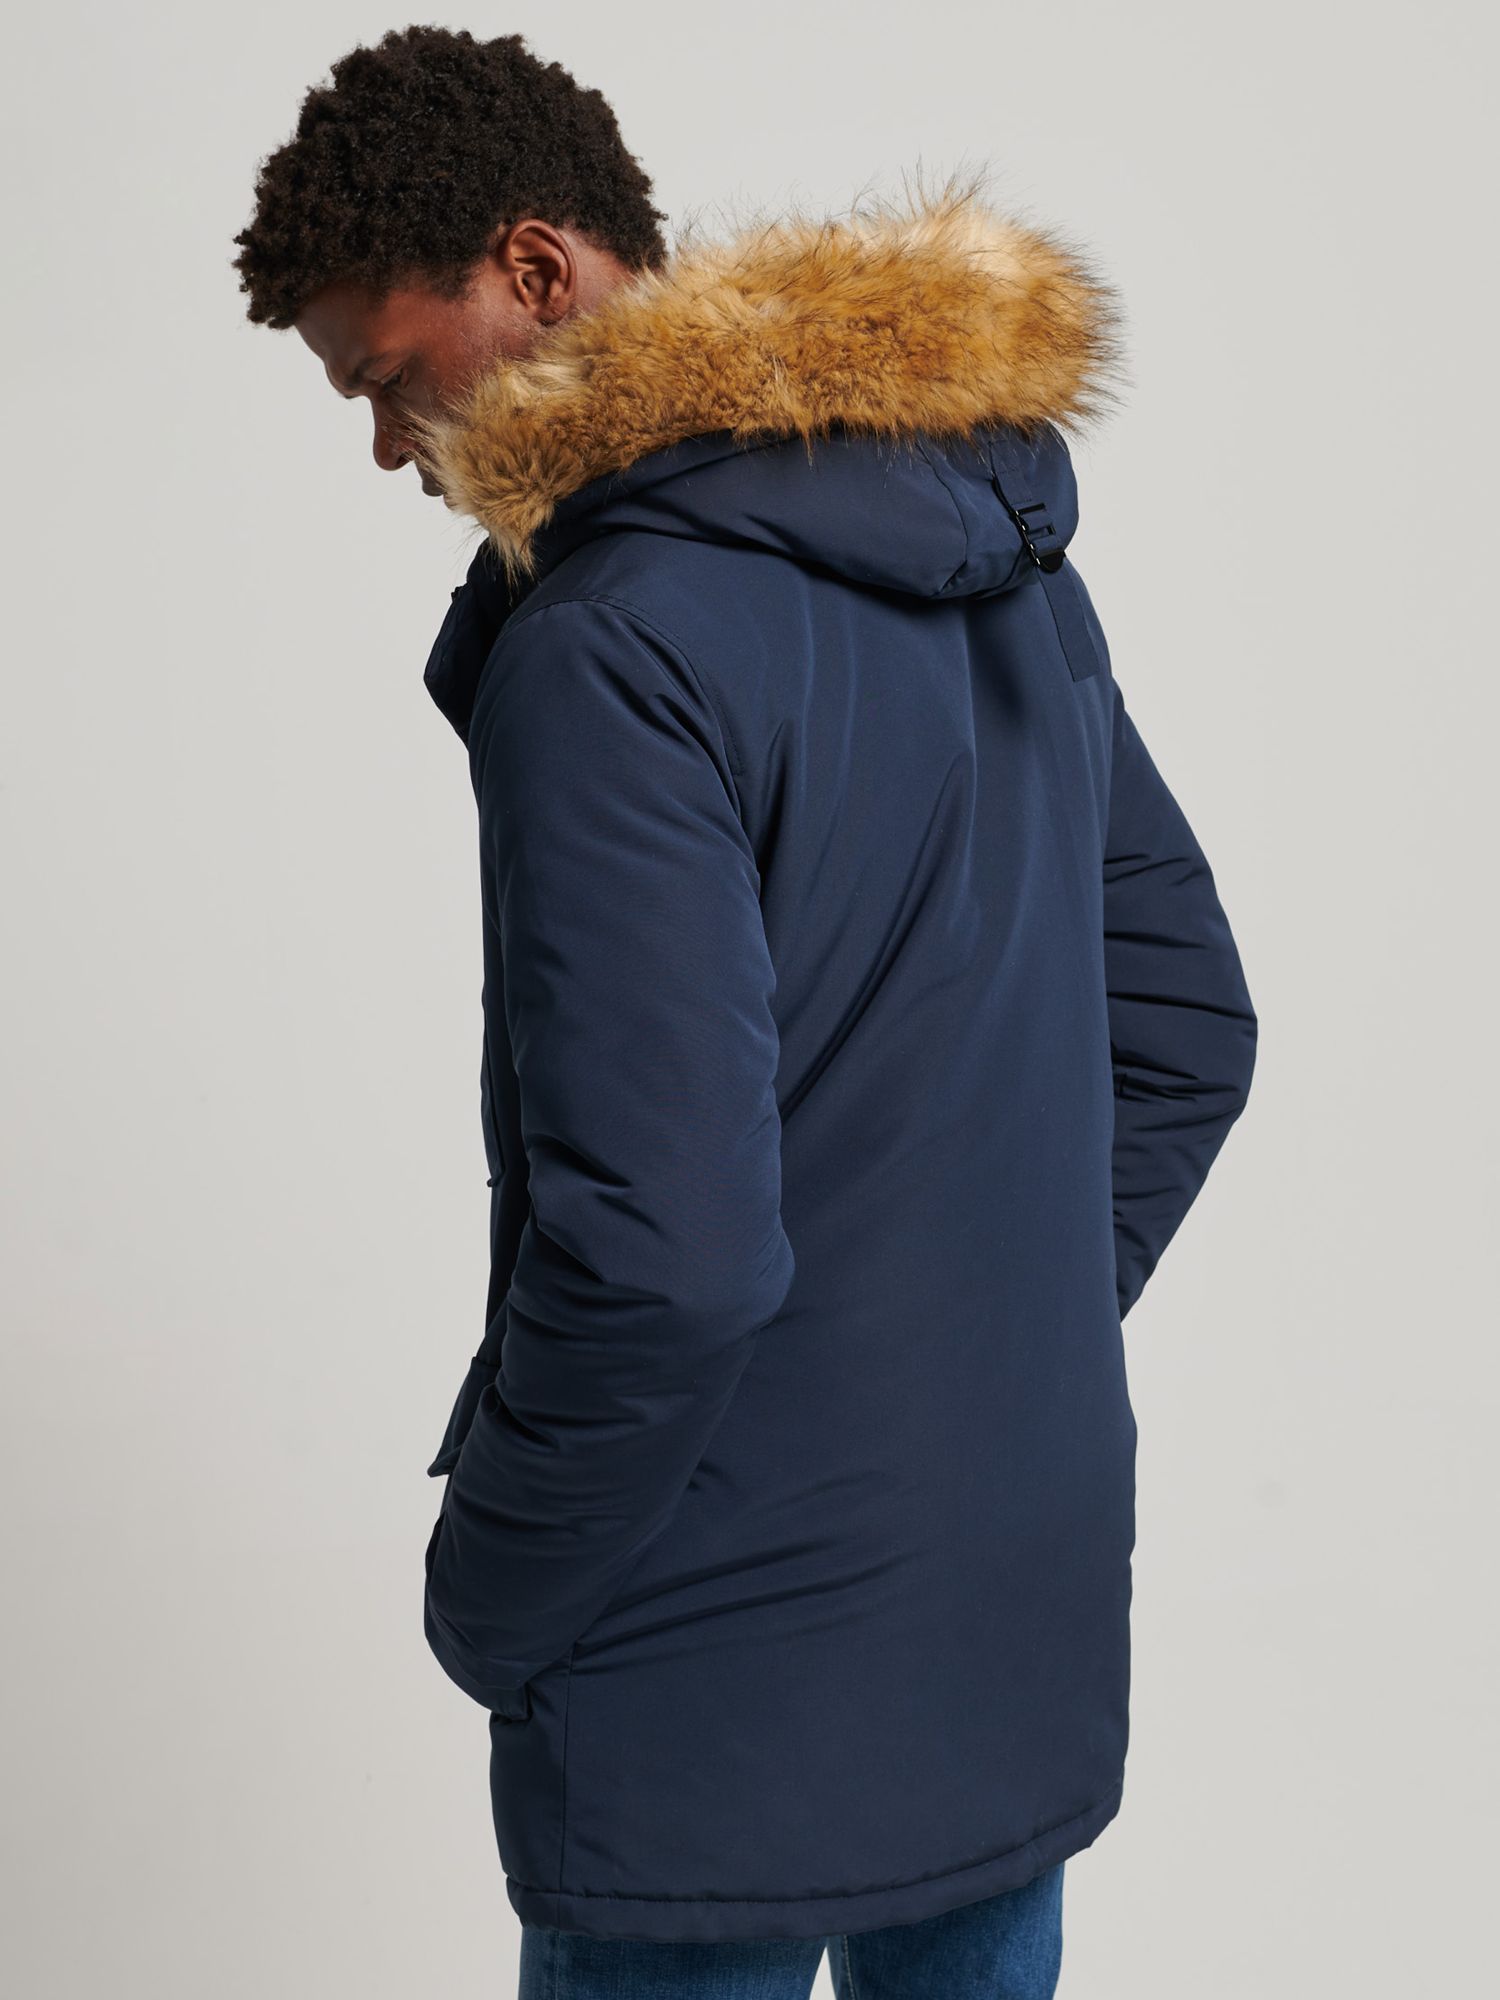 Superdry Hooded Faux Lewis Navy at & Chrome Nordic Parka, Everest Partners Fur John